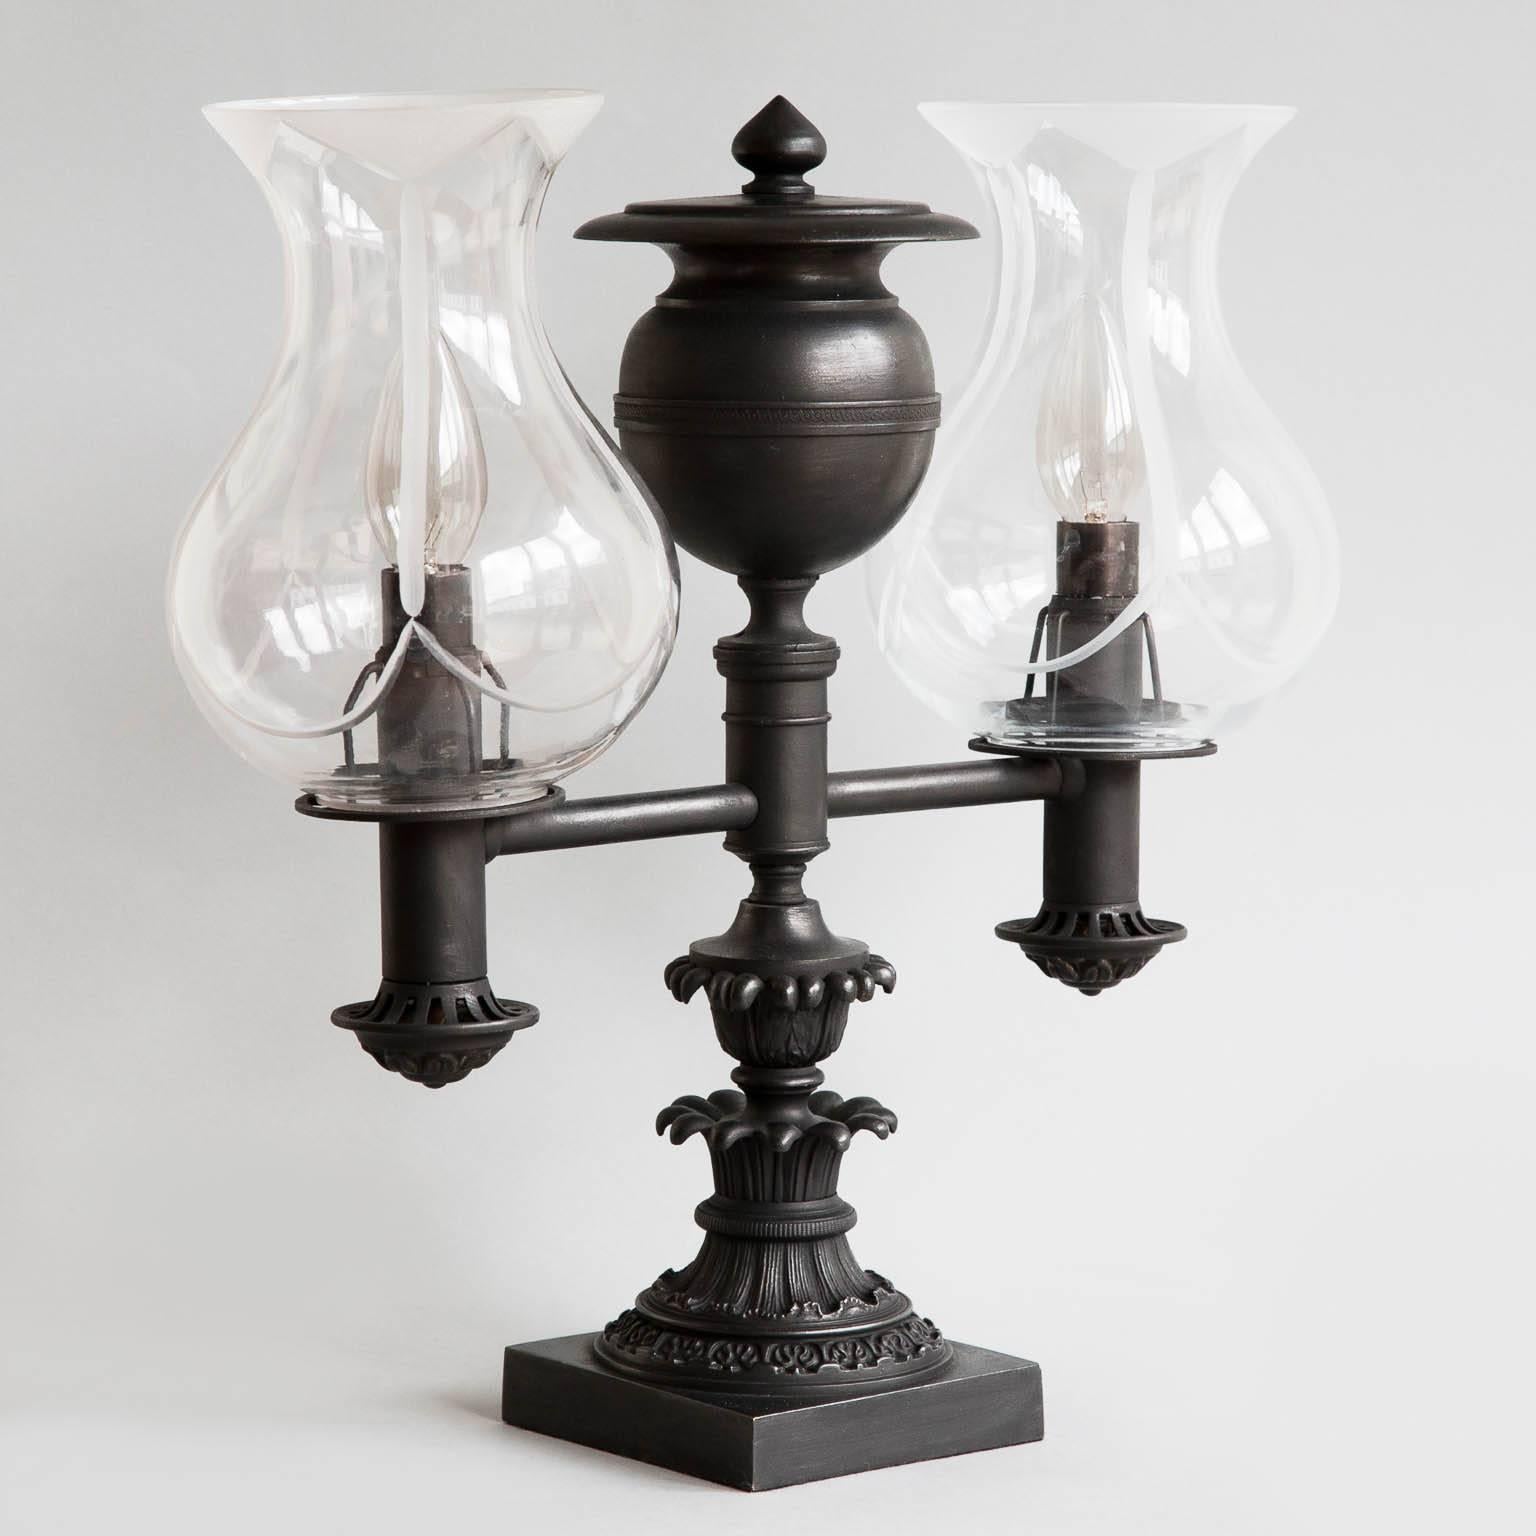 The central column with cast foliate decoration, surmounted by an urn with a pointed finial on top. Each with two straight arms and single burners, now currently electrified for the UK with E14 bulb holders. 
With later replacement glass shades,